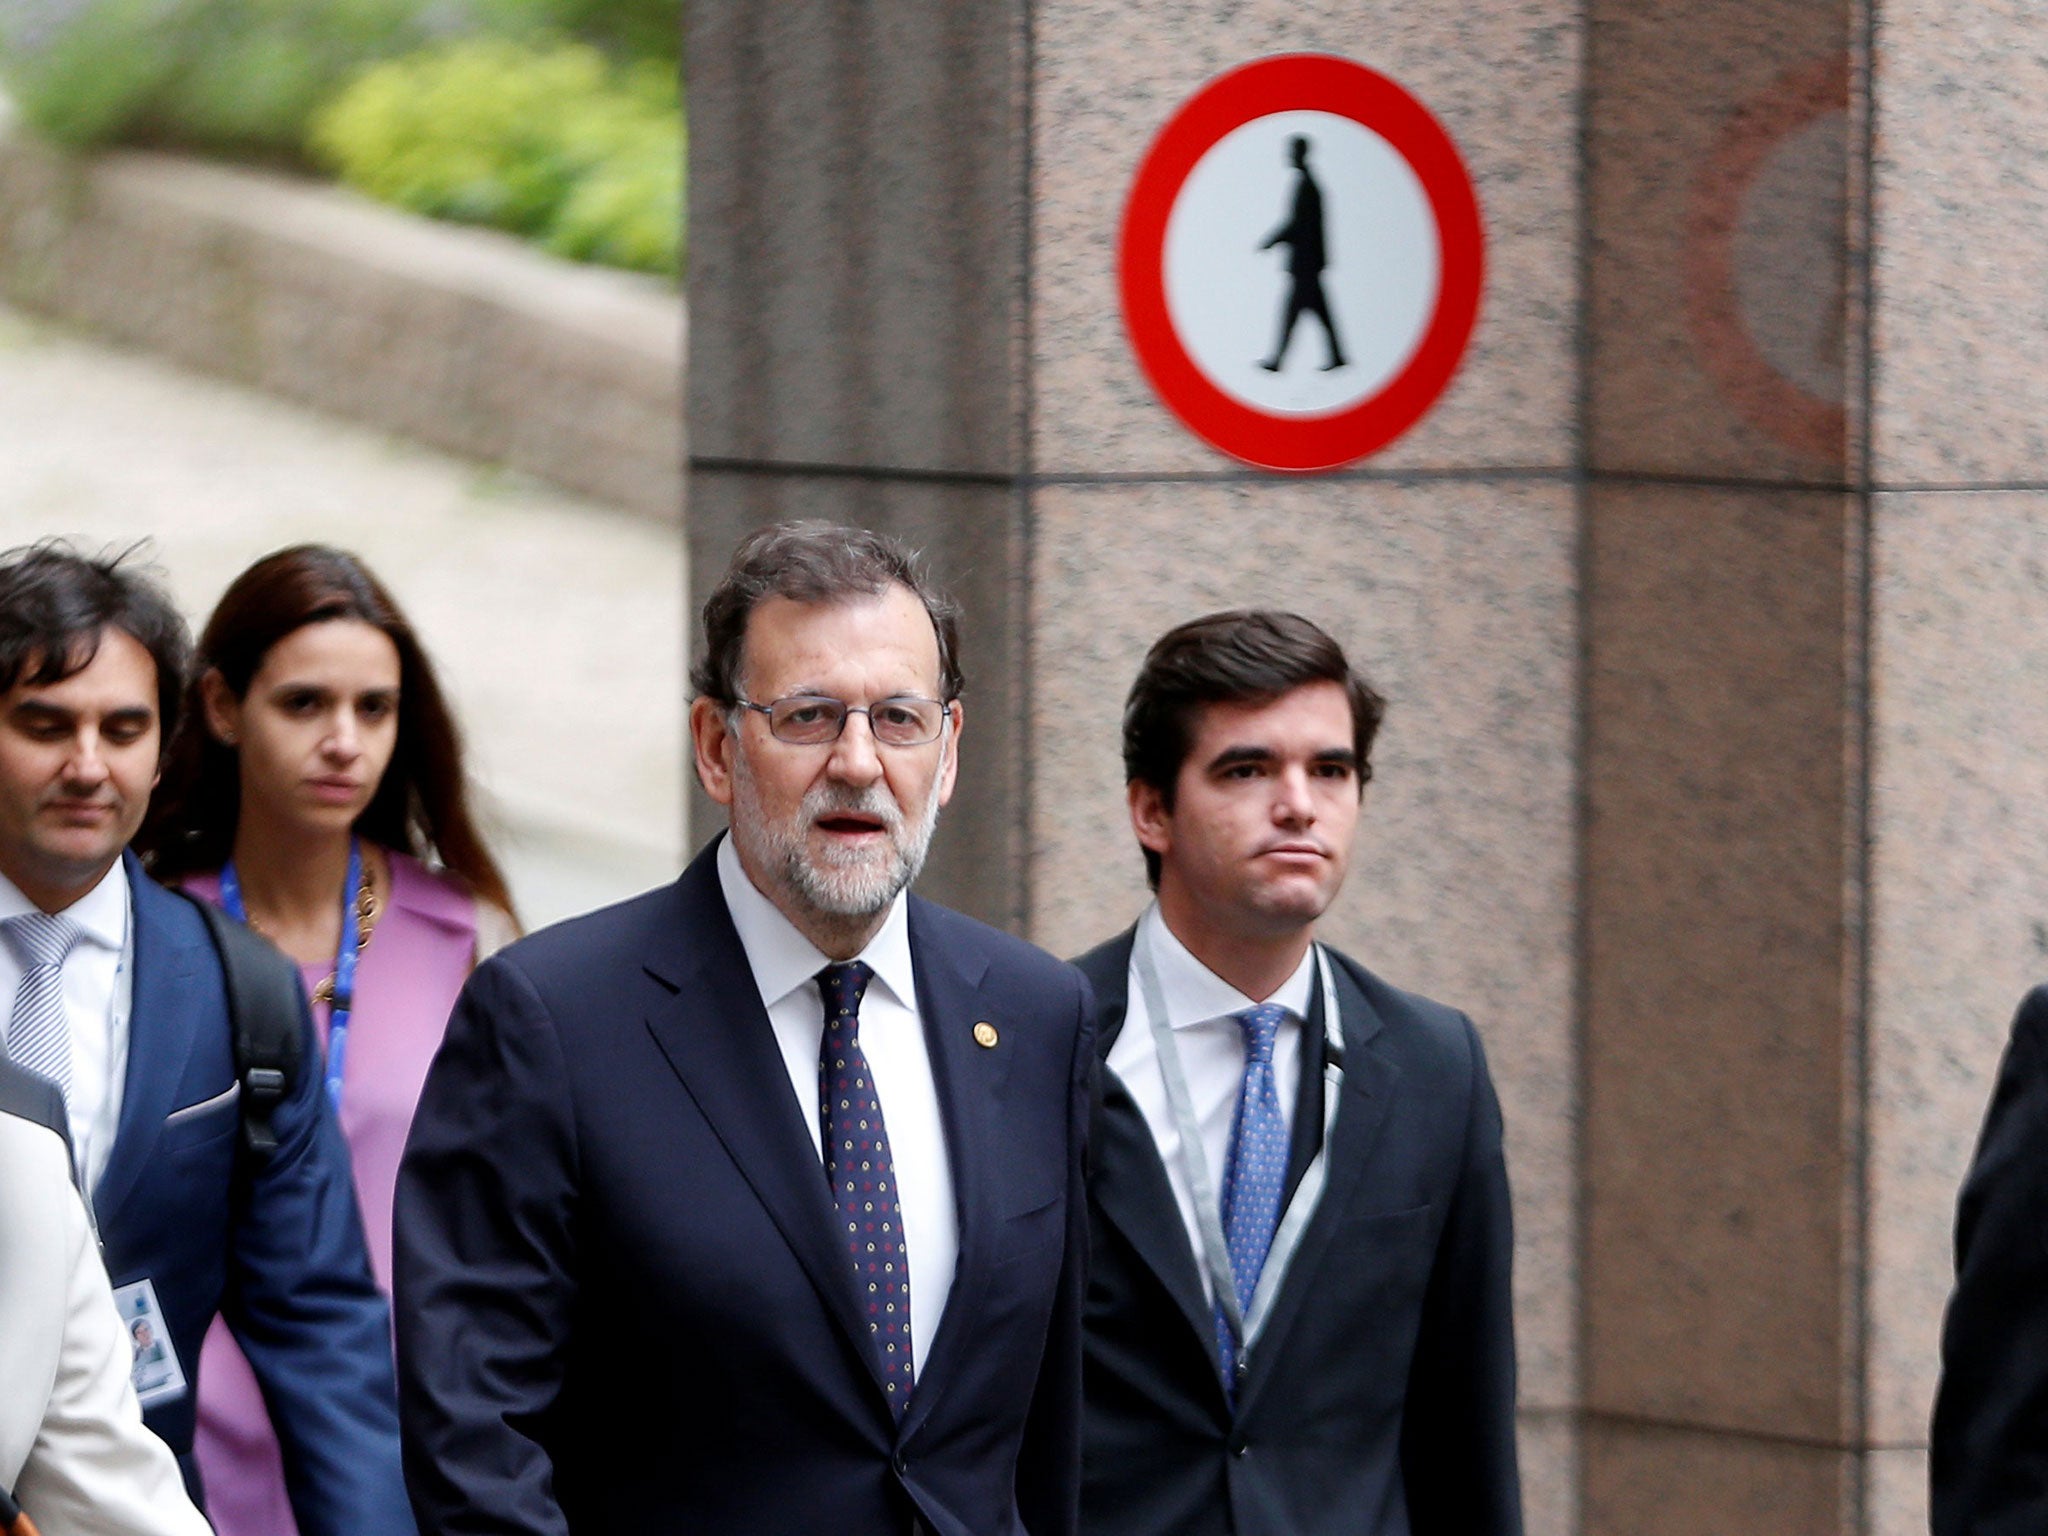 Spain's Prime Minister Mariano Rajoy arrives on the second day of the EU Summit in Brussels, Belgium, June 29, 2016